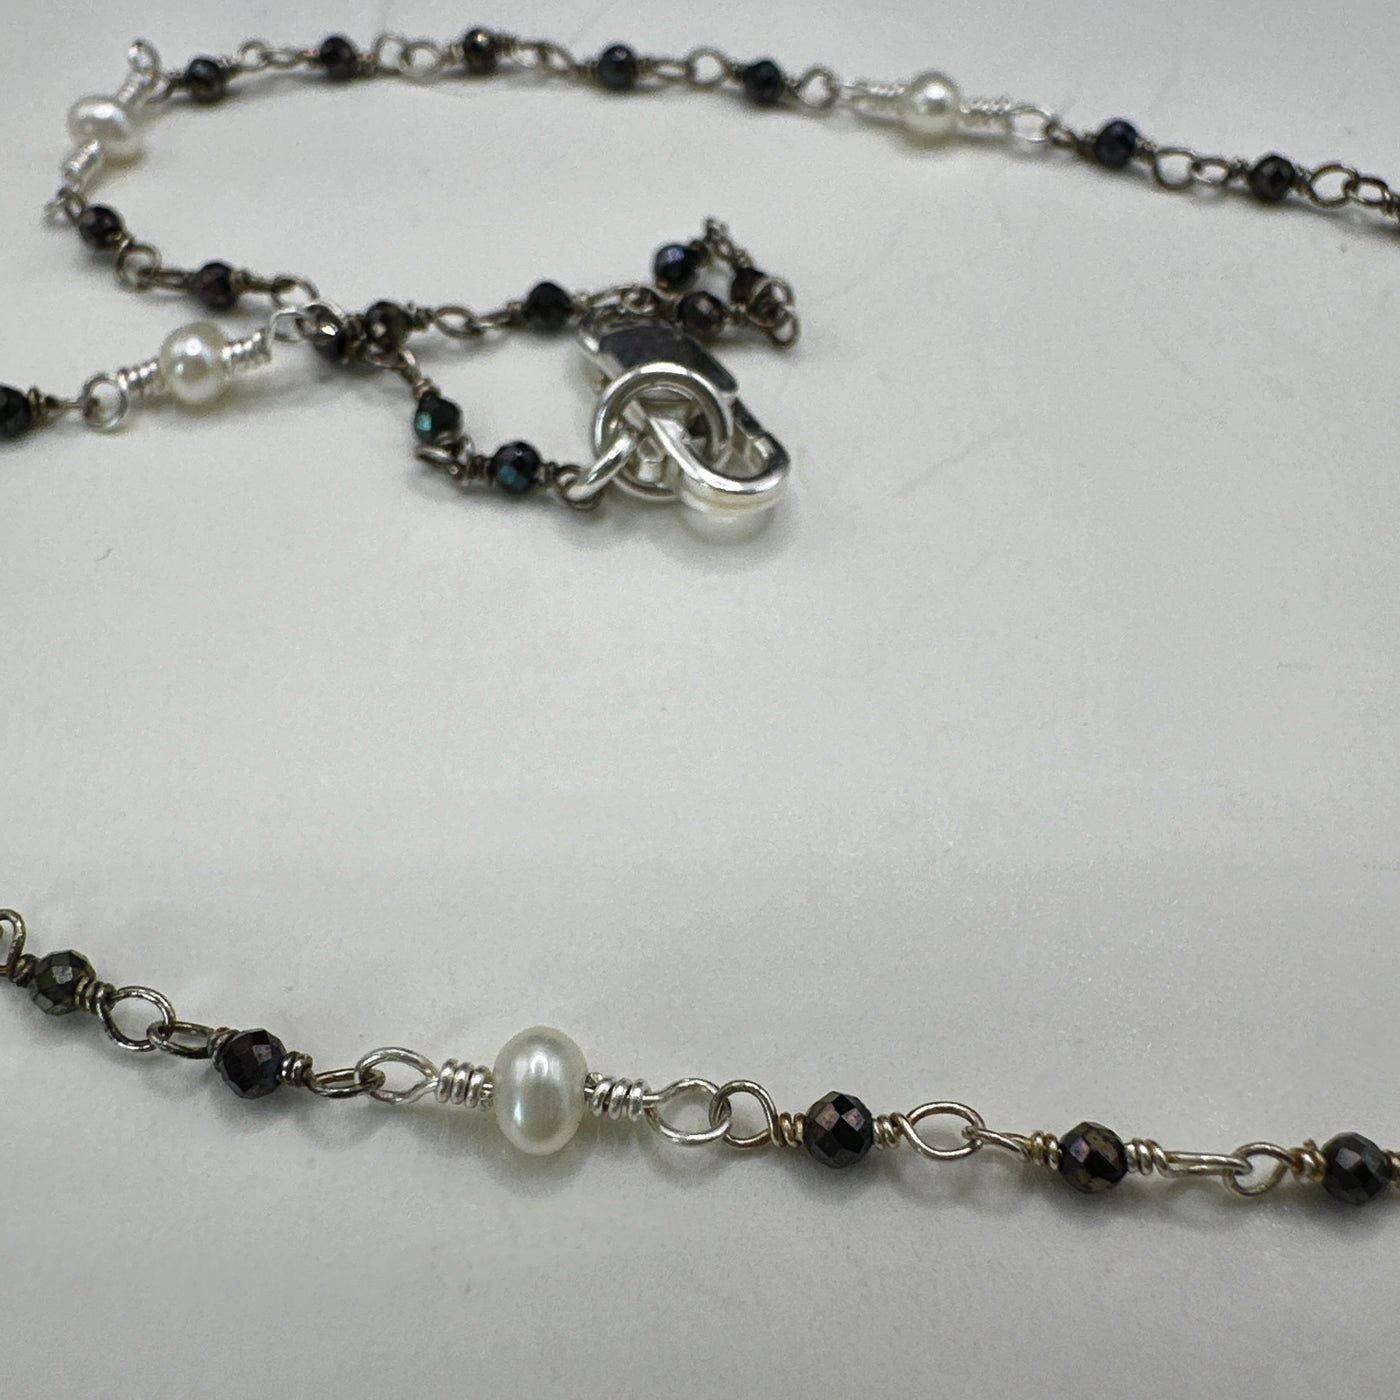 Oval freshwaterpearls and dark amethyst silver necklace